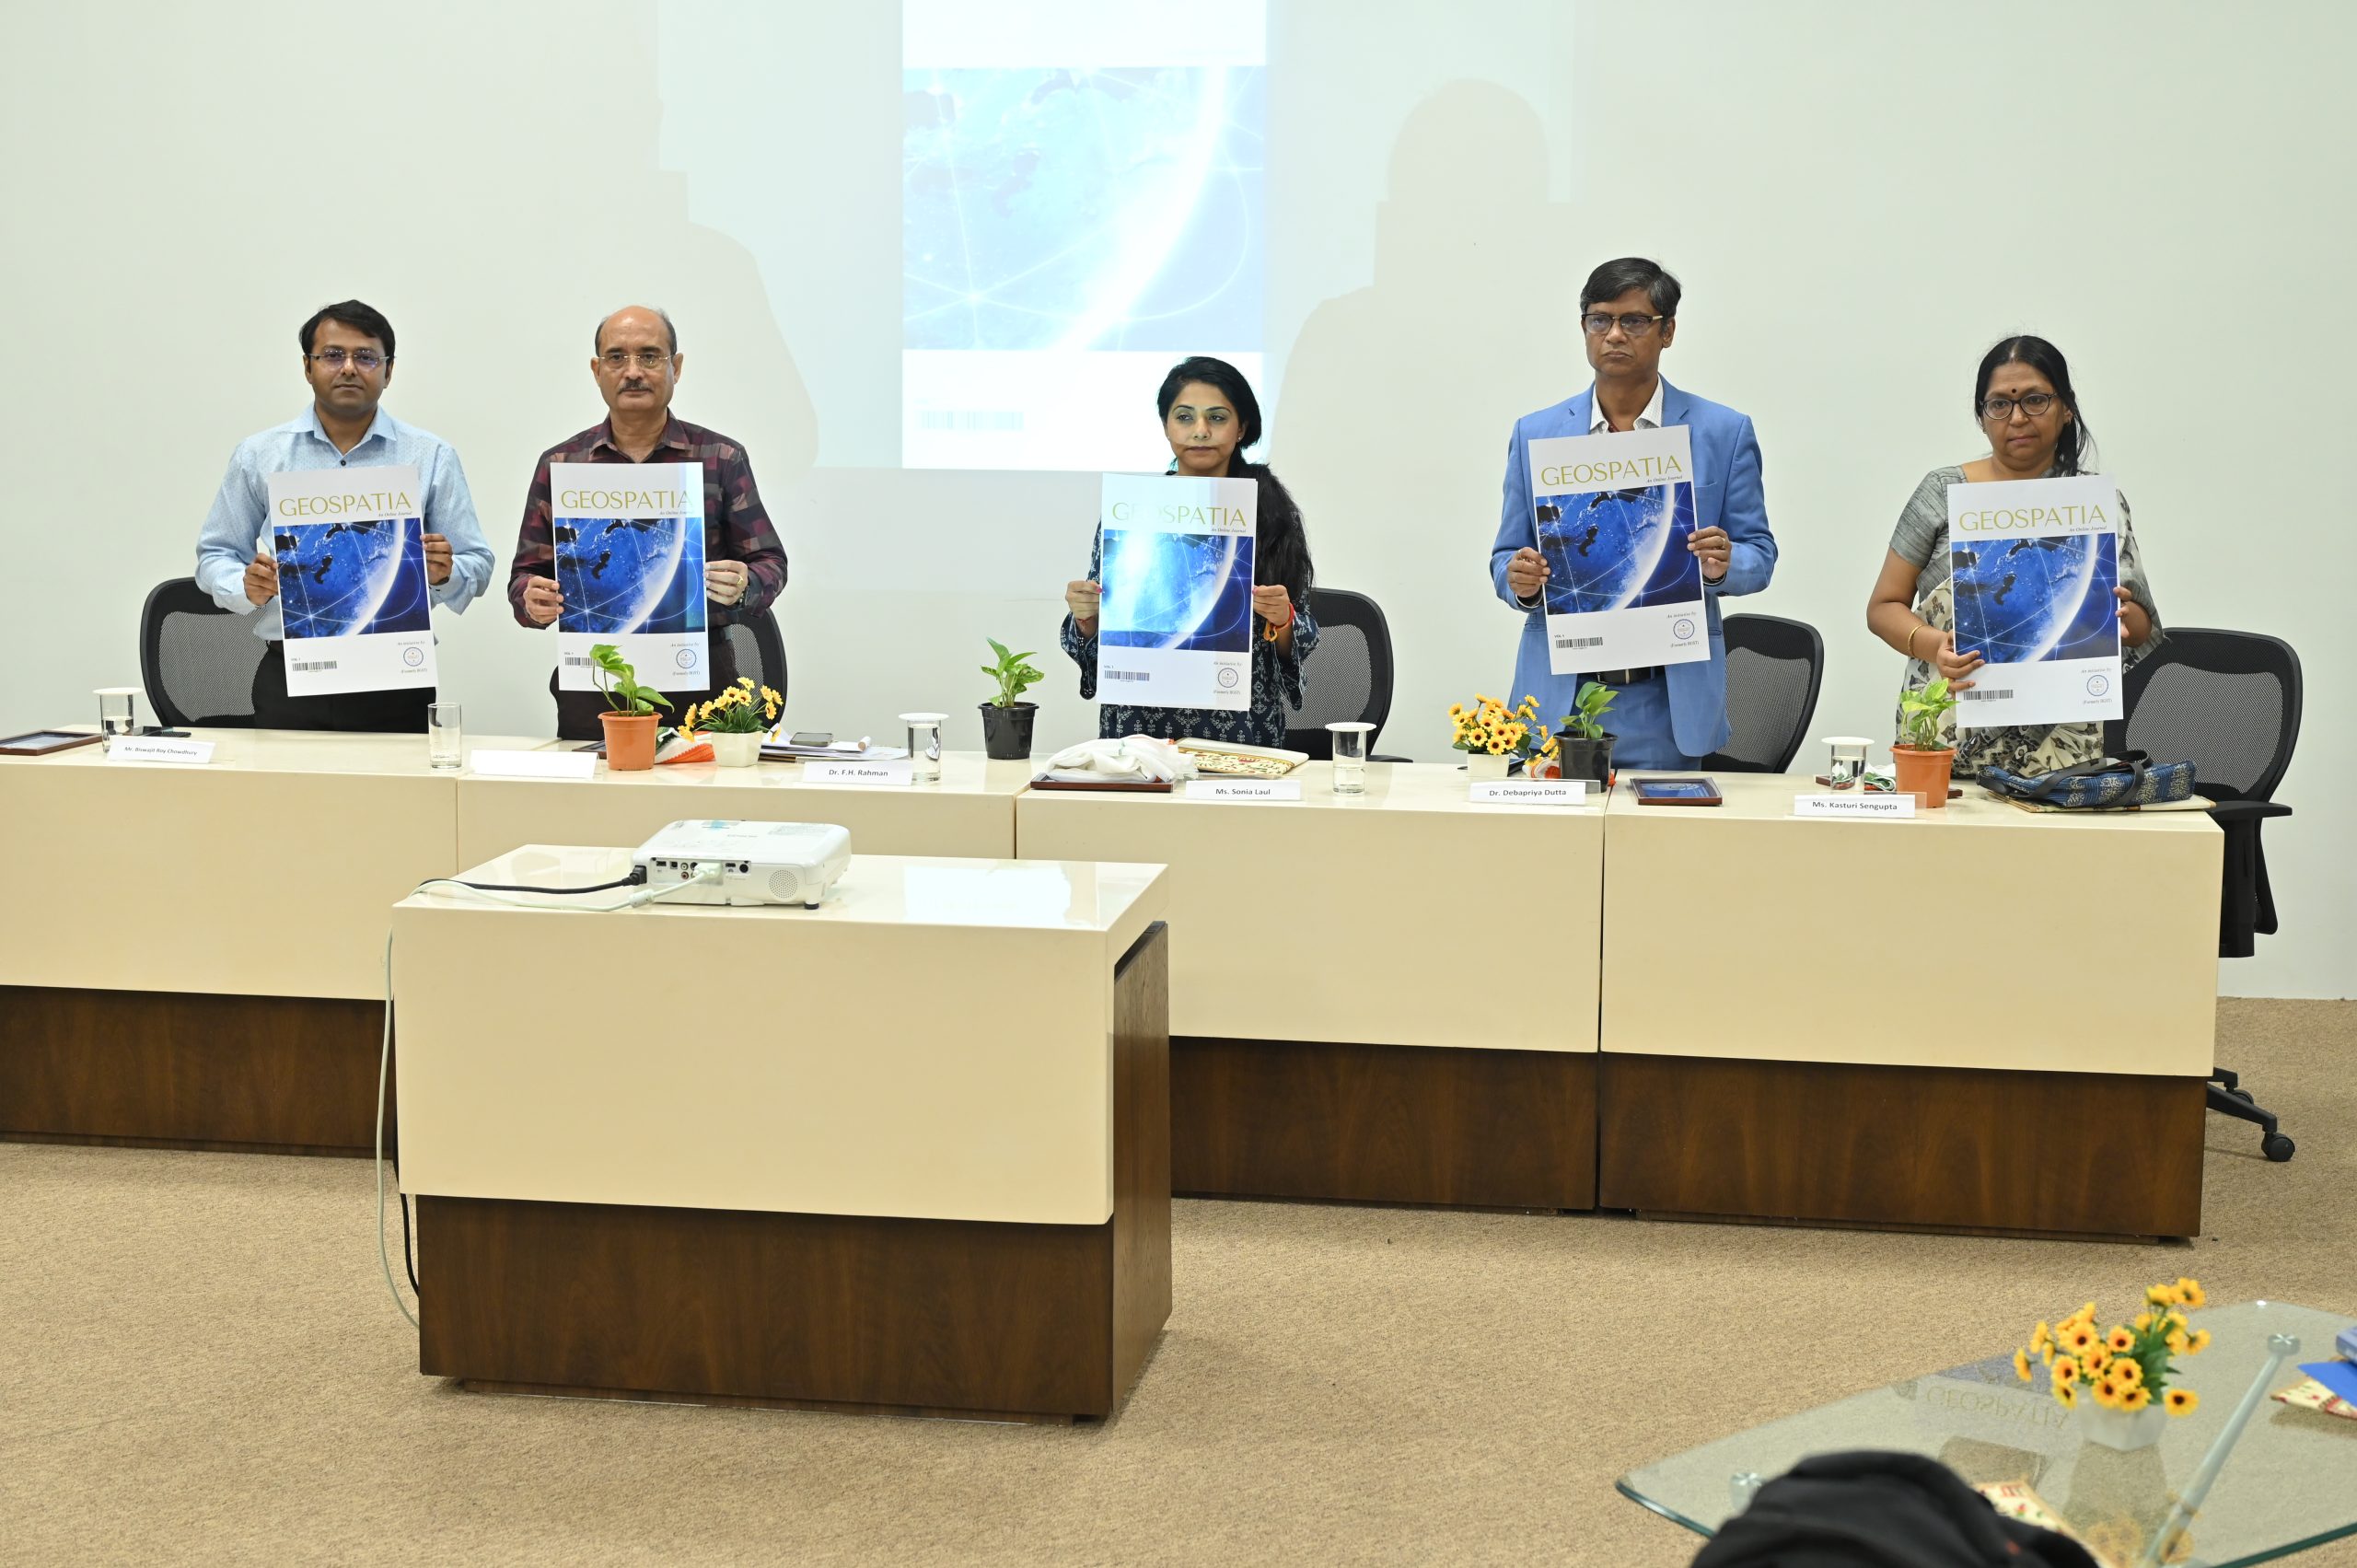 Unveiling of the Geospatial journal cover